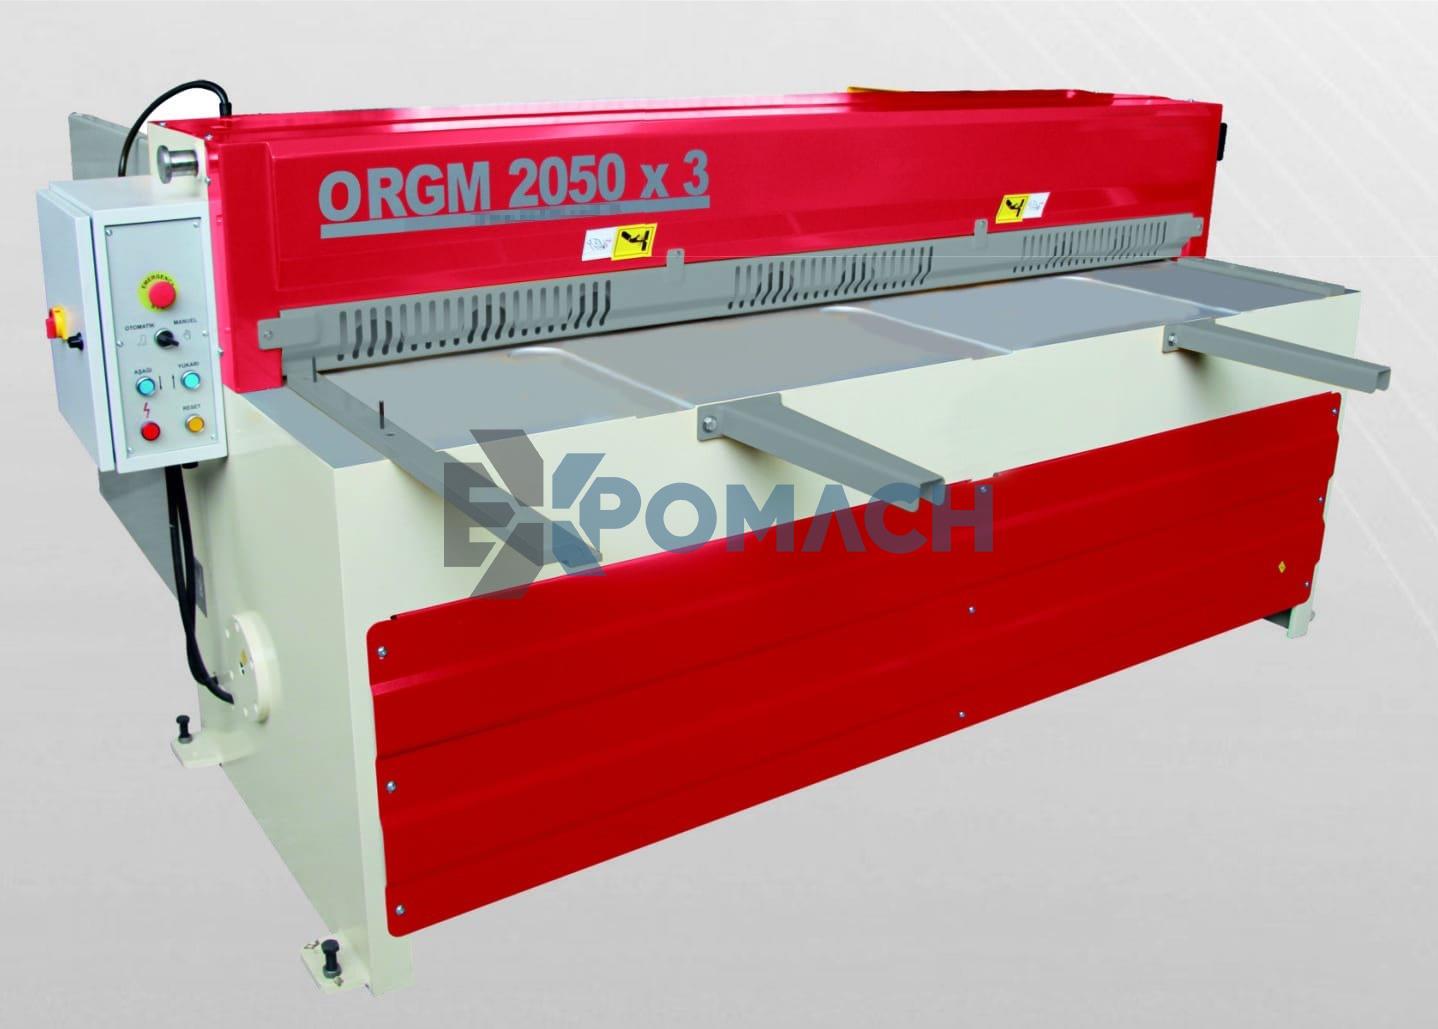 2050 x 3mm Reducer Guillotine Shears - Guillotine Machines